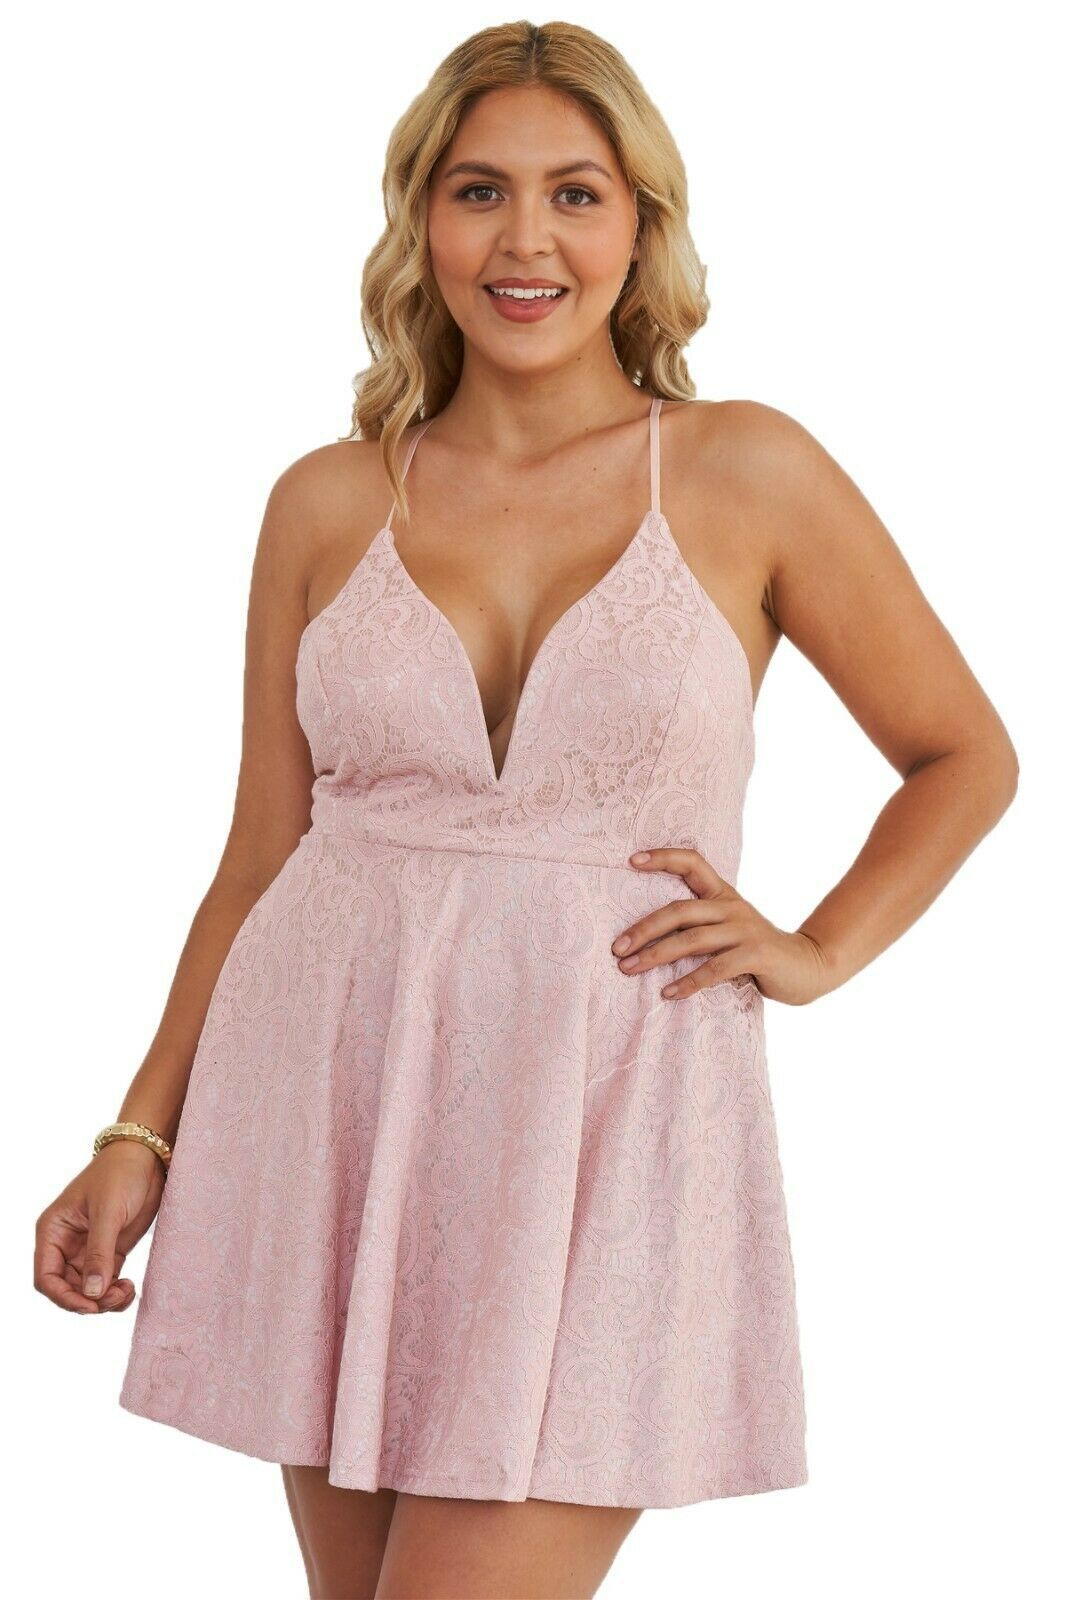 Plus Size Women Fashion Pink Floral Cocktail Embroidered Stretch Mini Dress